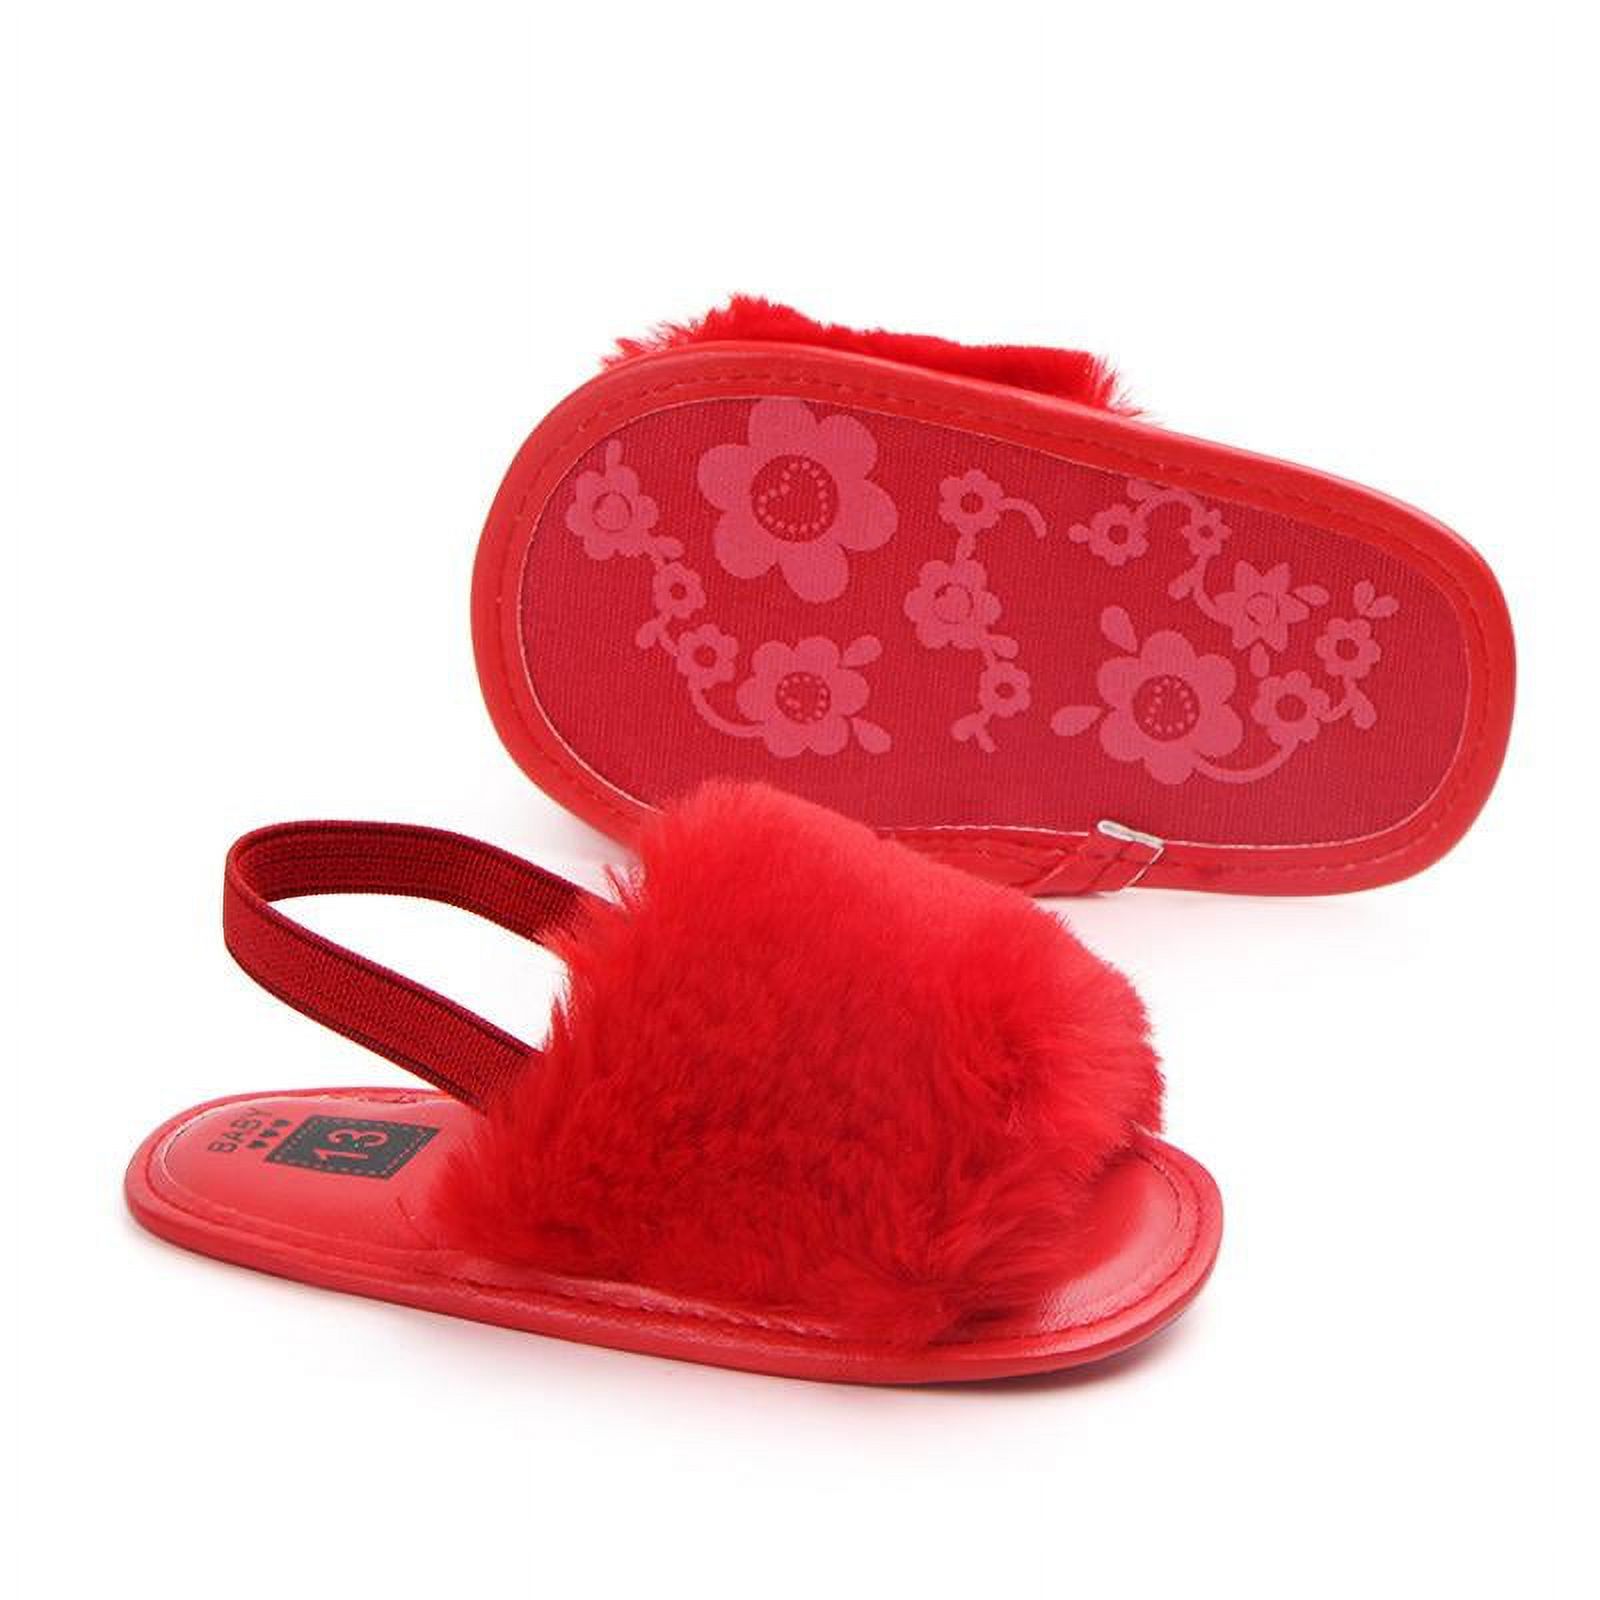 Baby Girls Summer Sandals Non Slip Soft Sole Infant Dress Shoes Newborn Toddler Furry Fur First Walker Crib Shoes House Slipper - image 2 of 4